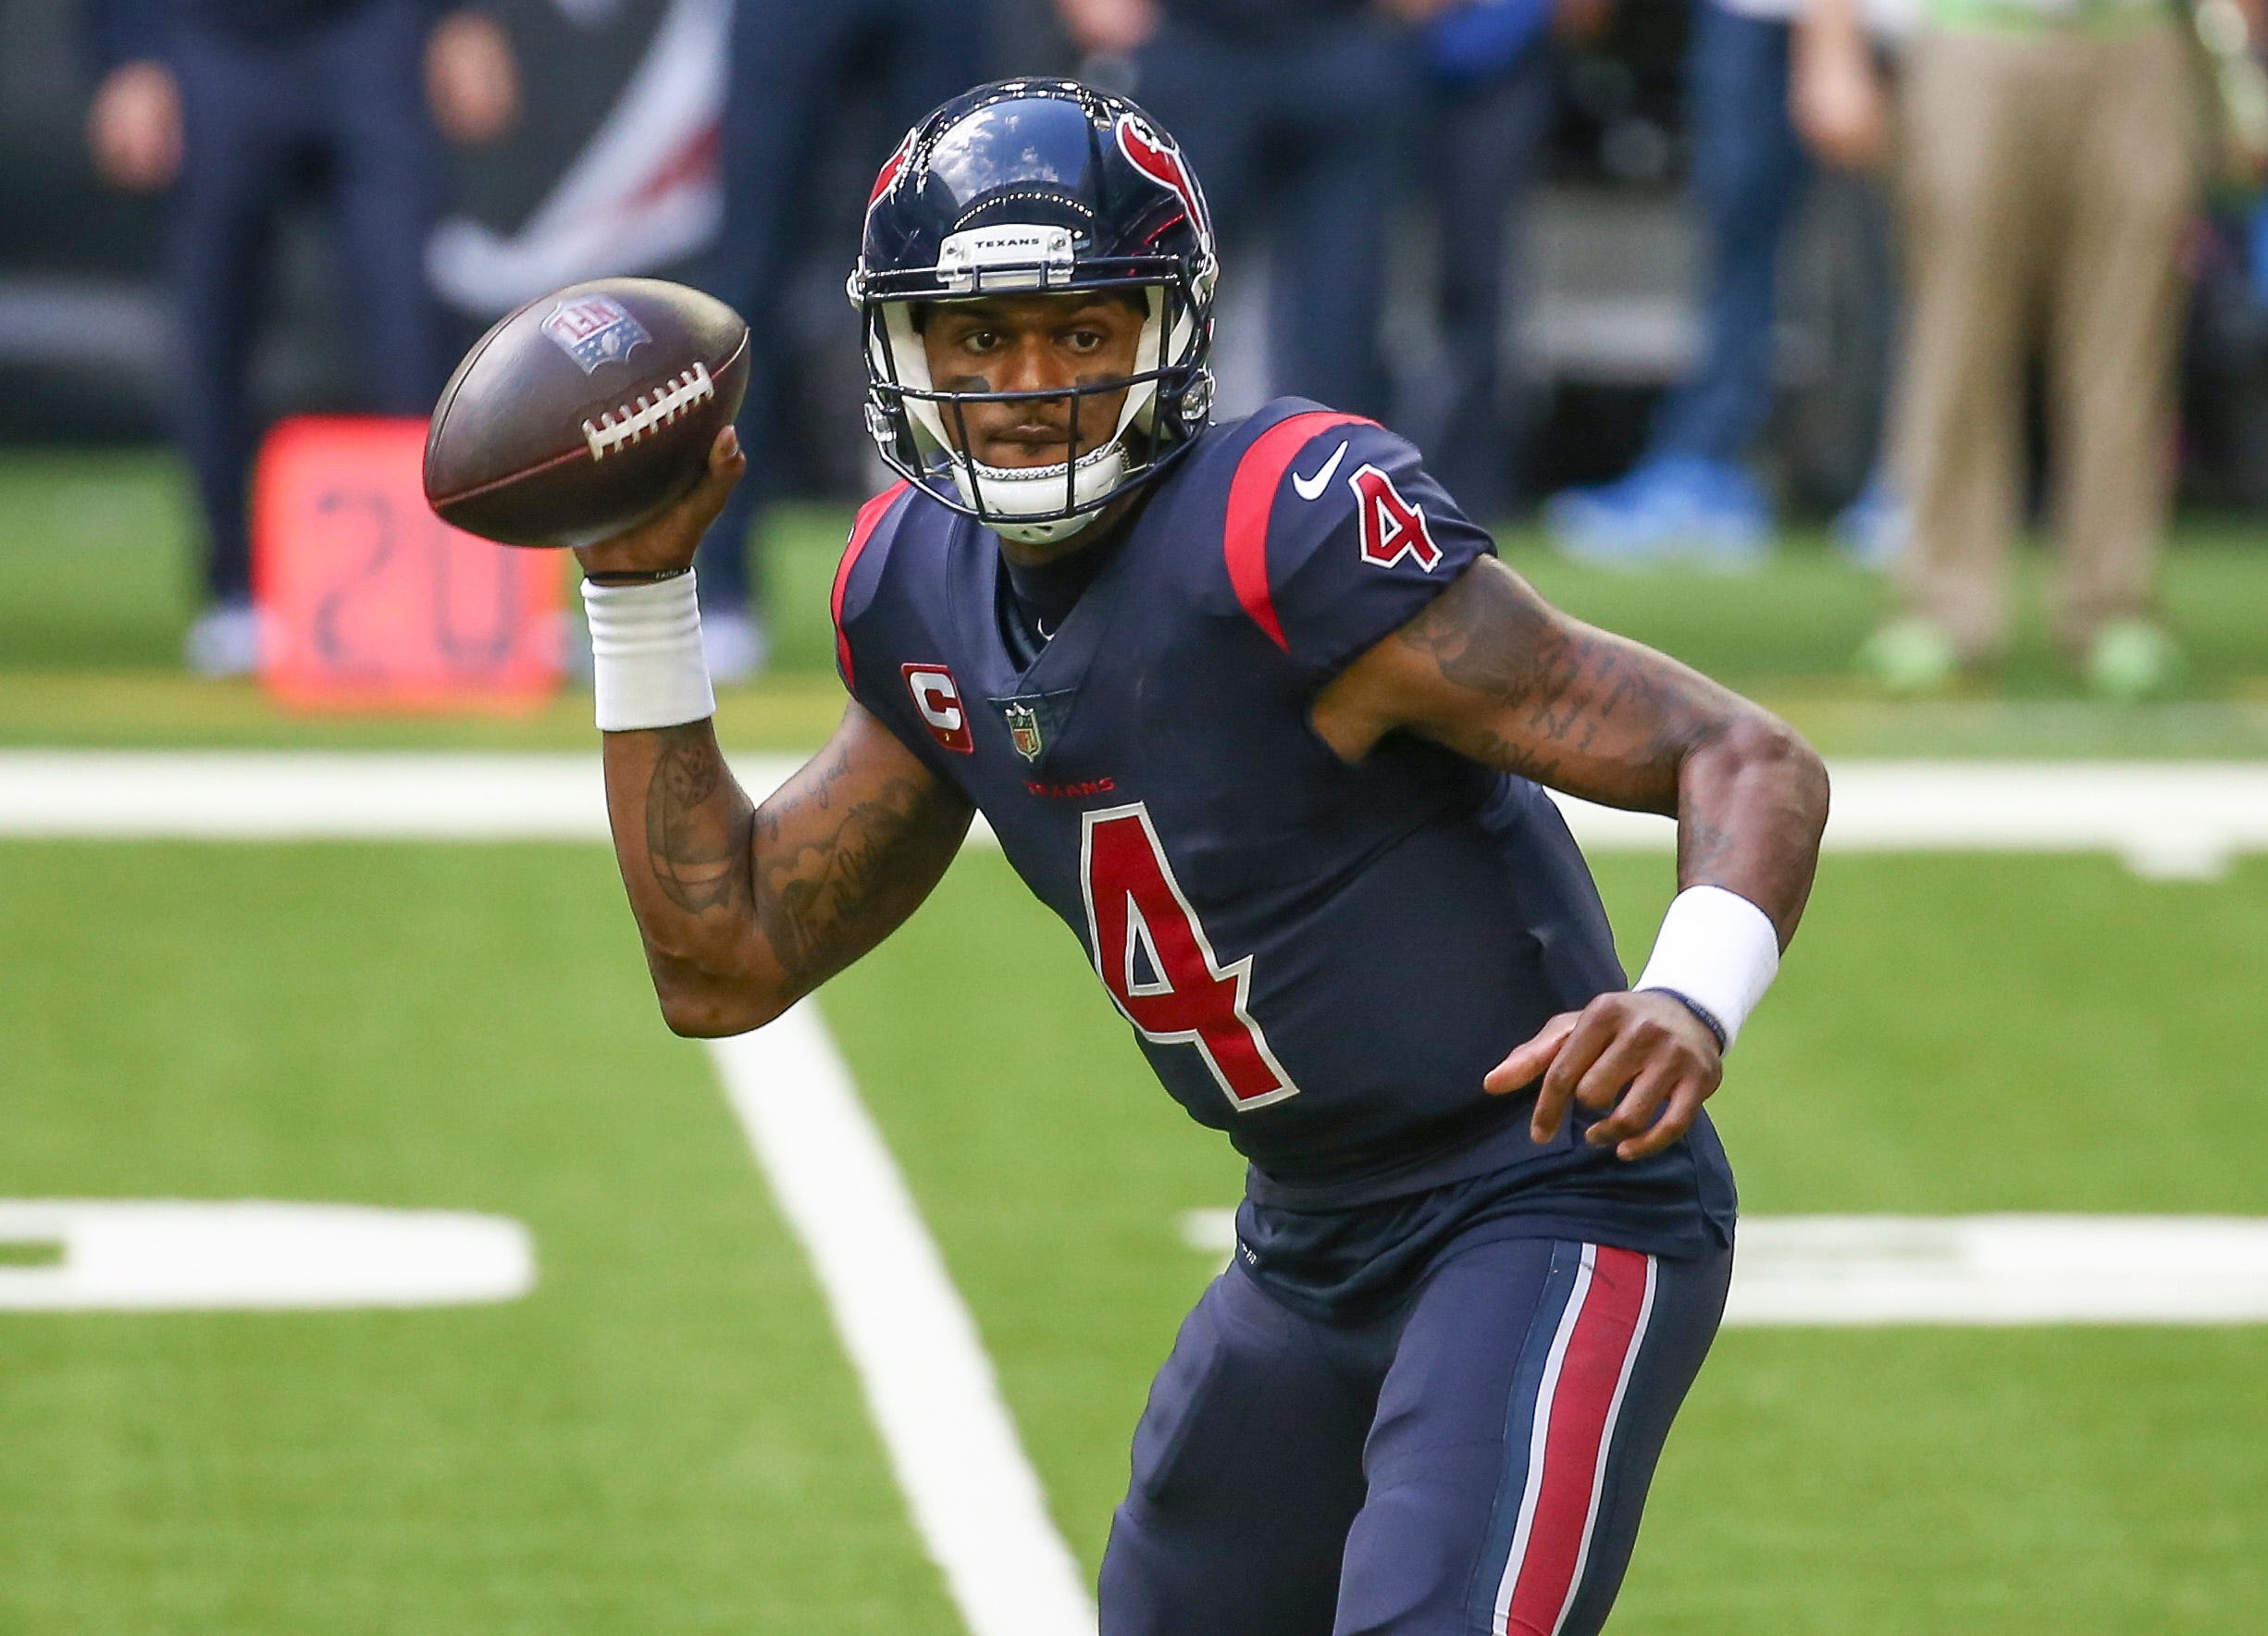 Opinion: Texans are a disaster and star Deshaun Watson is unhappy – but there is a path that may save team